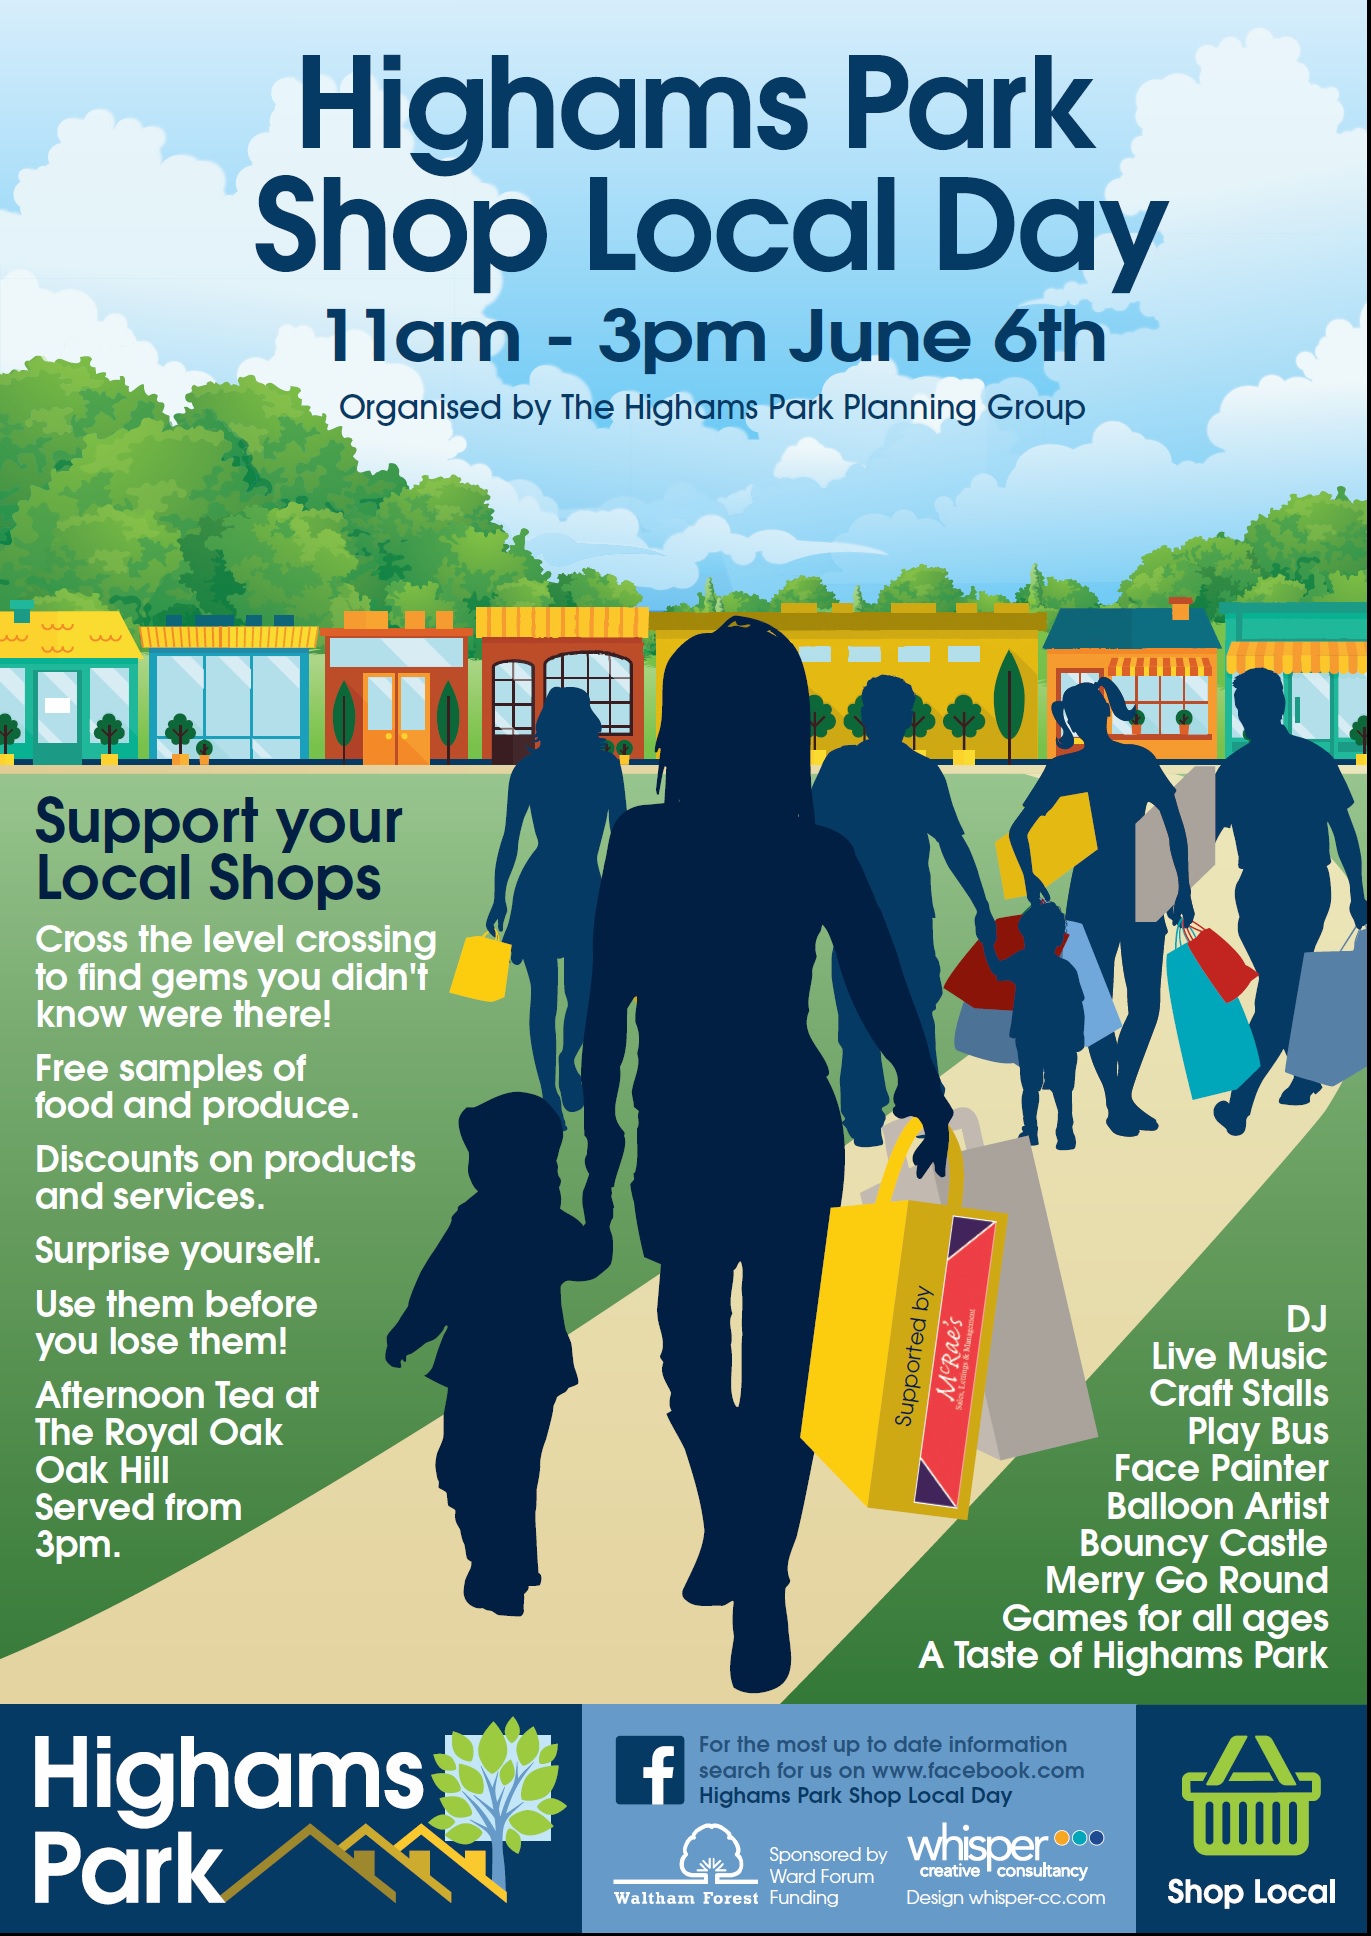 Highams Park Shop Local Day – Saturday 6th June 11:00 am to 3:00 pm